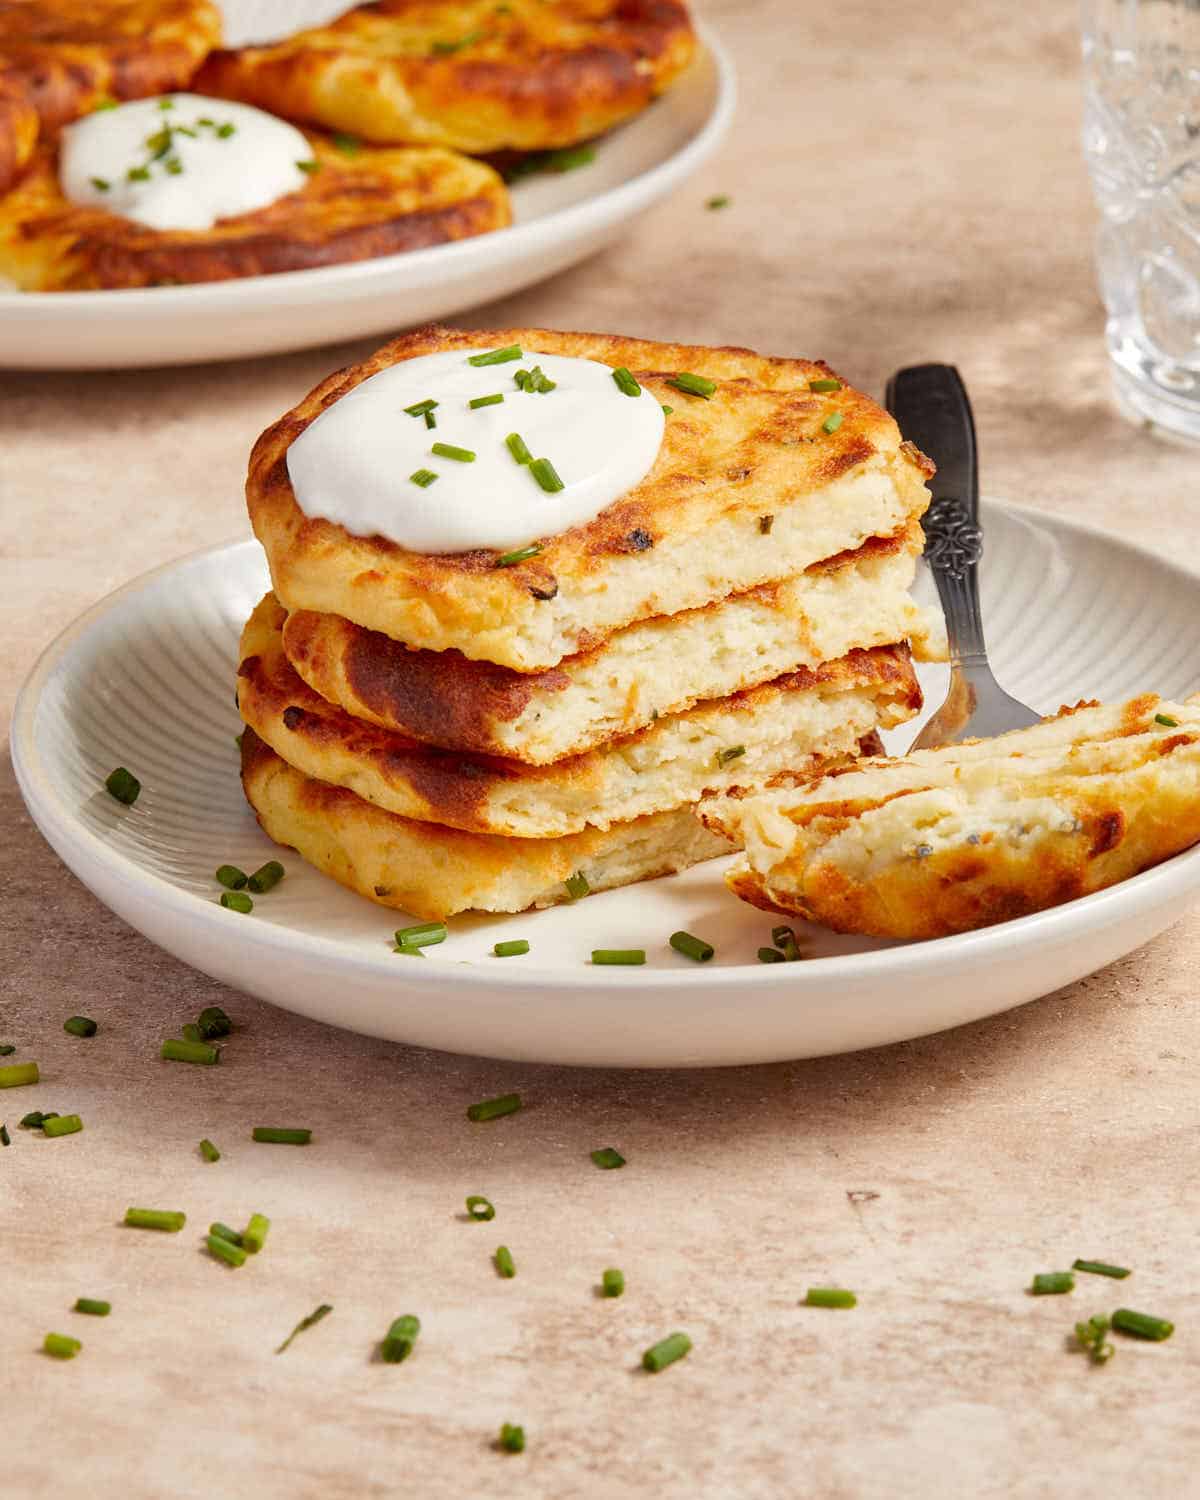 Side view of a stack of potato cakes on a plate with some removed with a fork.